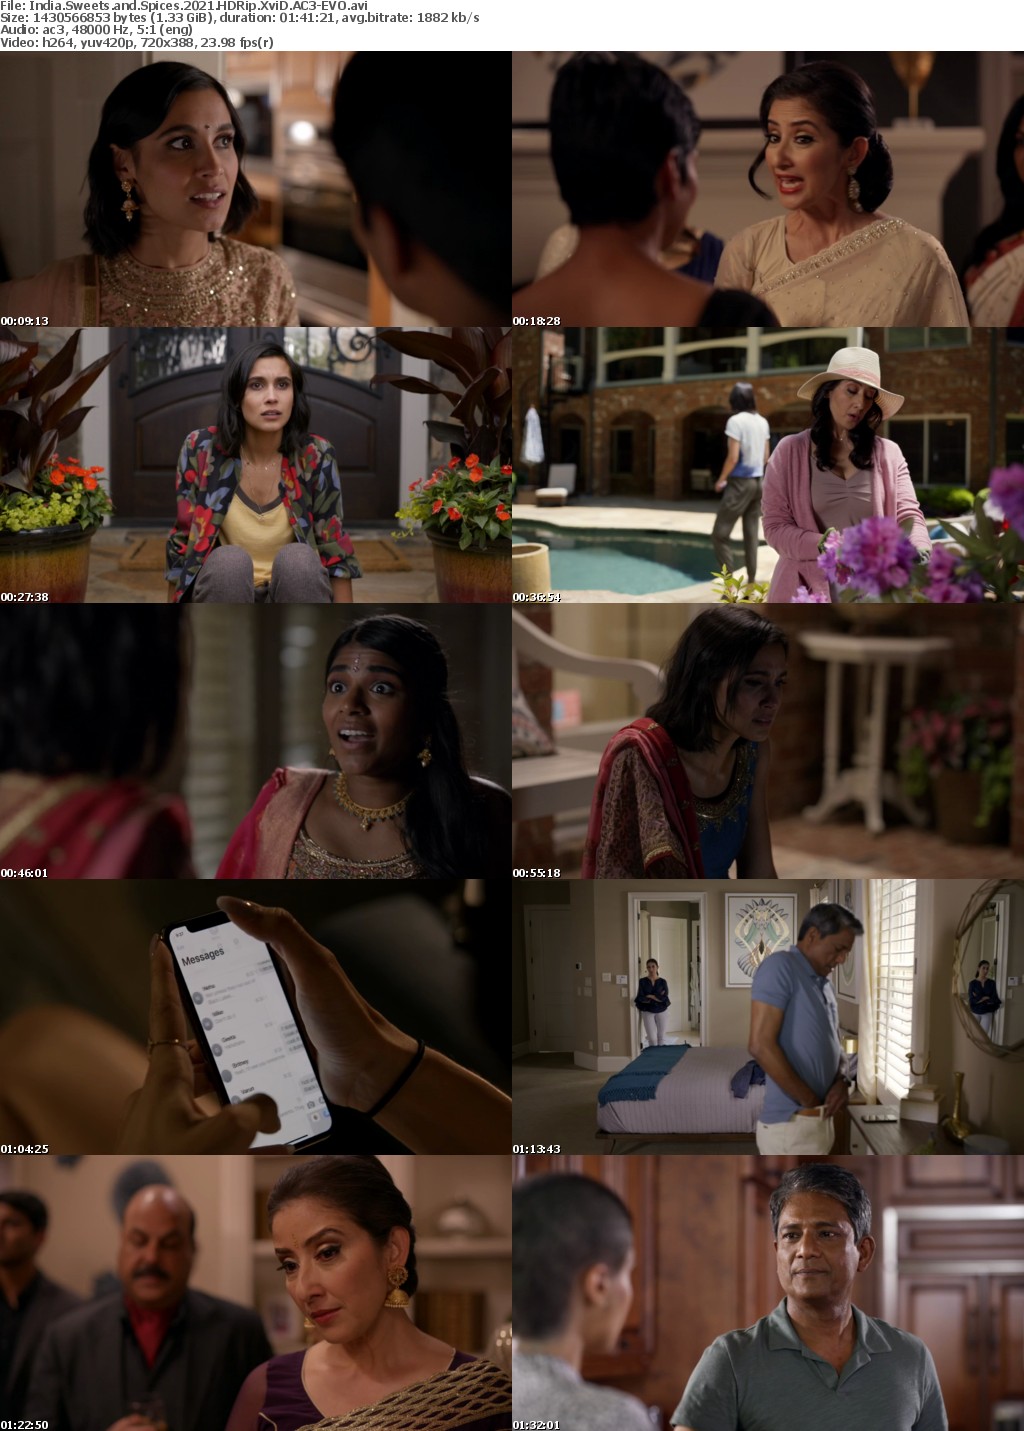 India Sweets and Spices 2021 HDRip XviD AC3-EVO